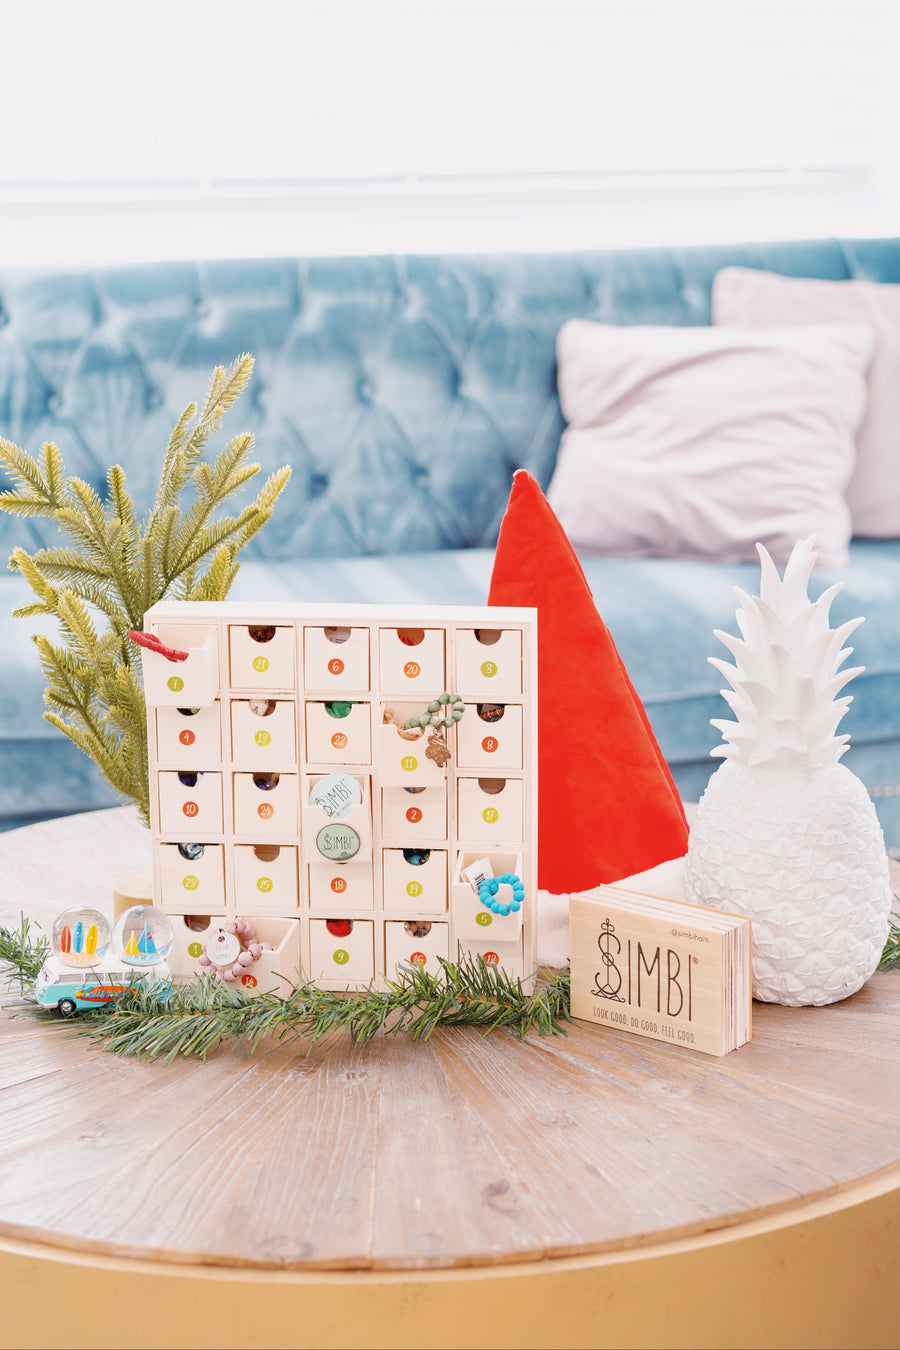 Advent calendar filled with jewelry and accessories and hair-wear